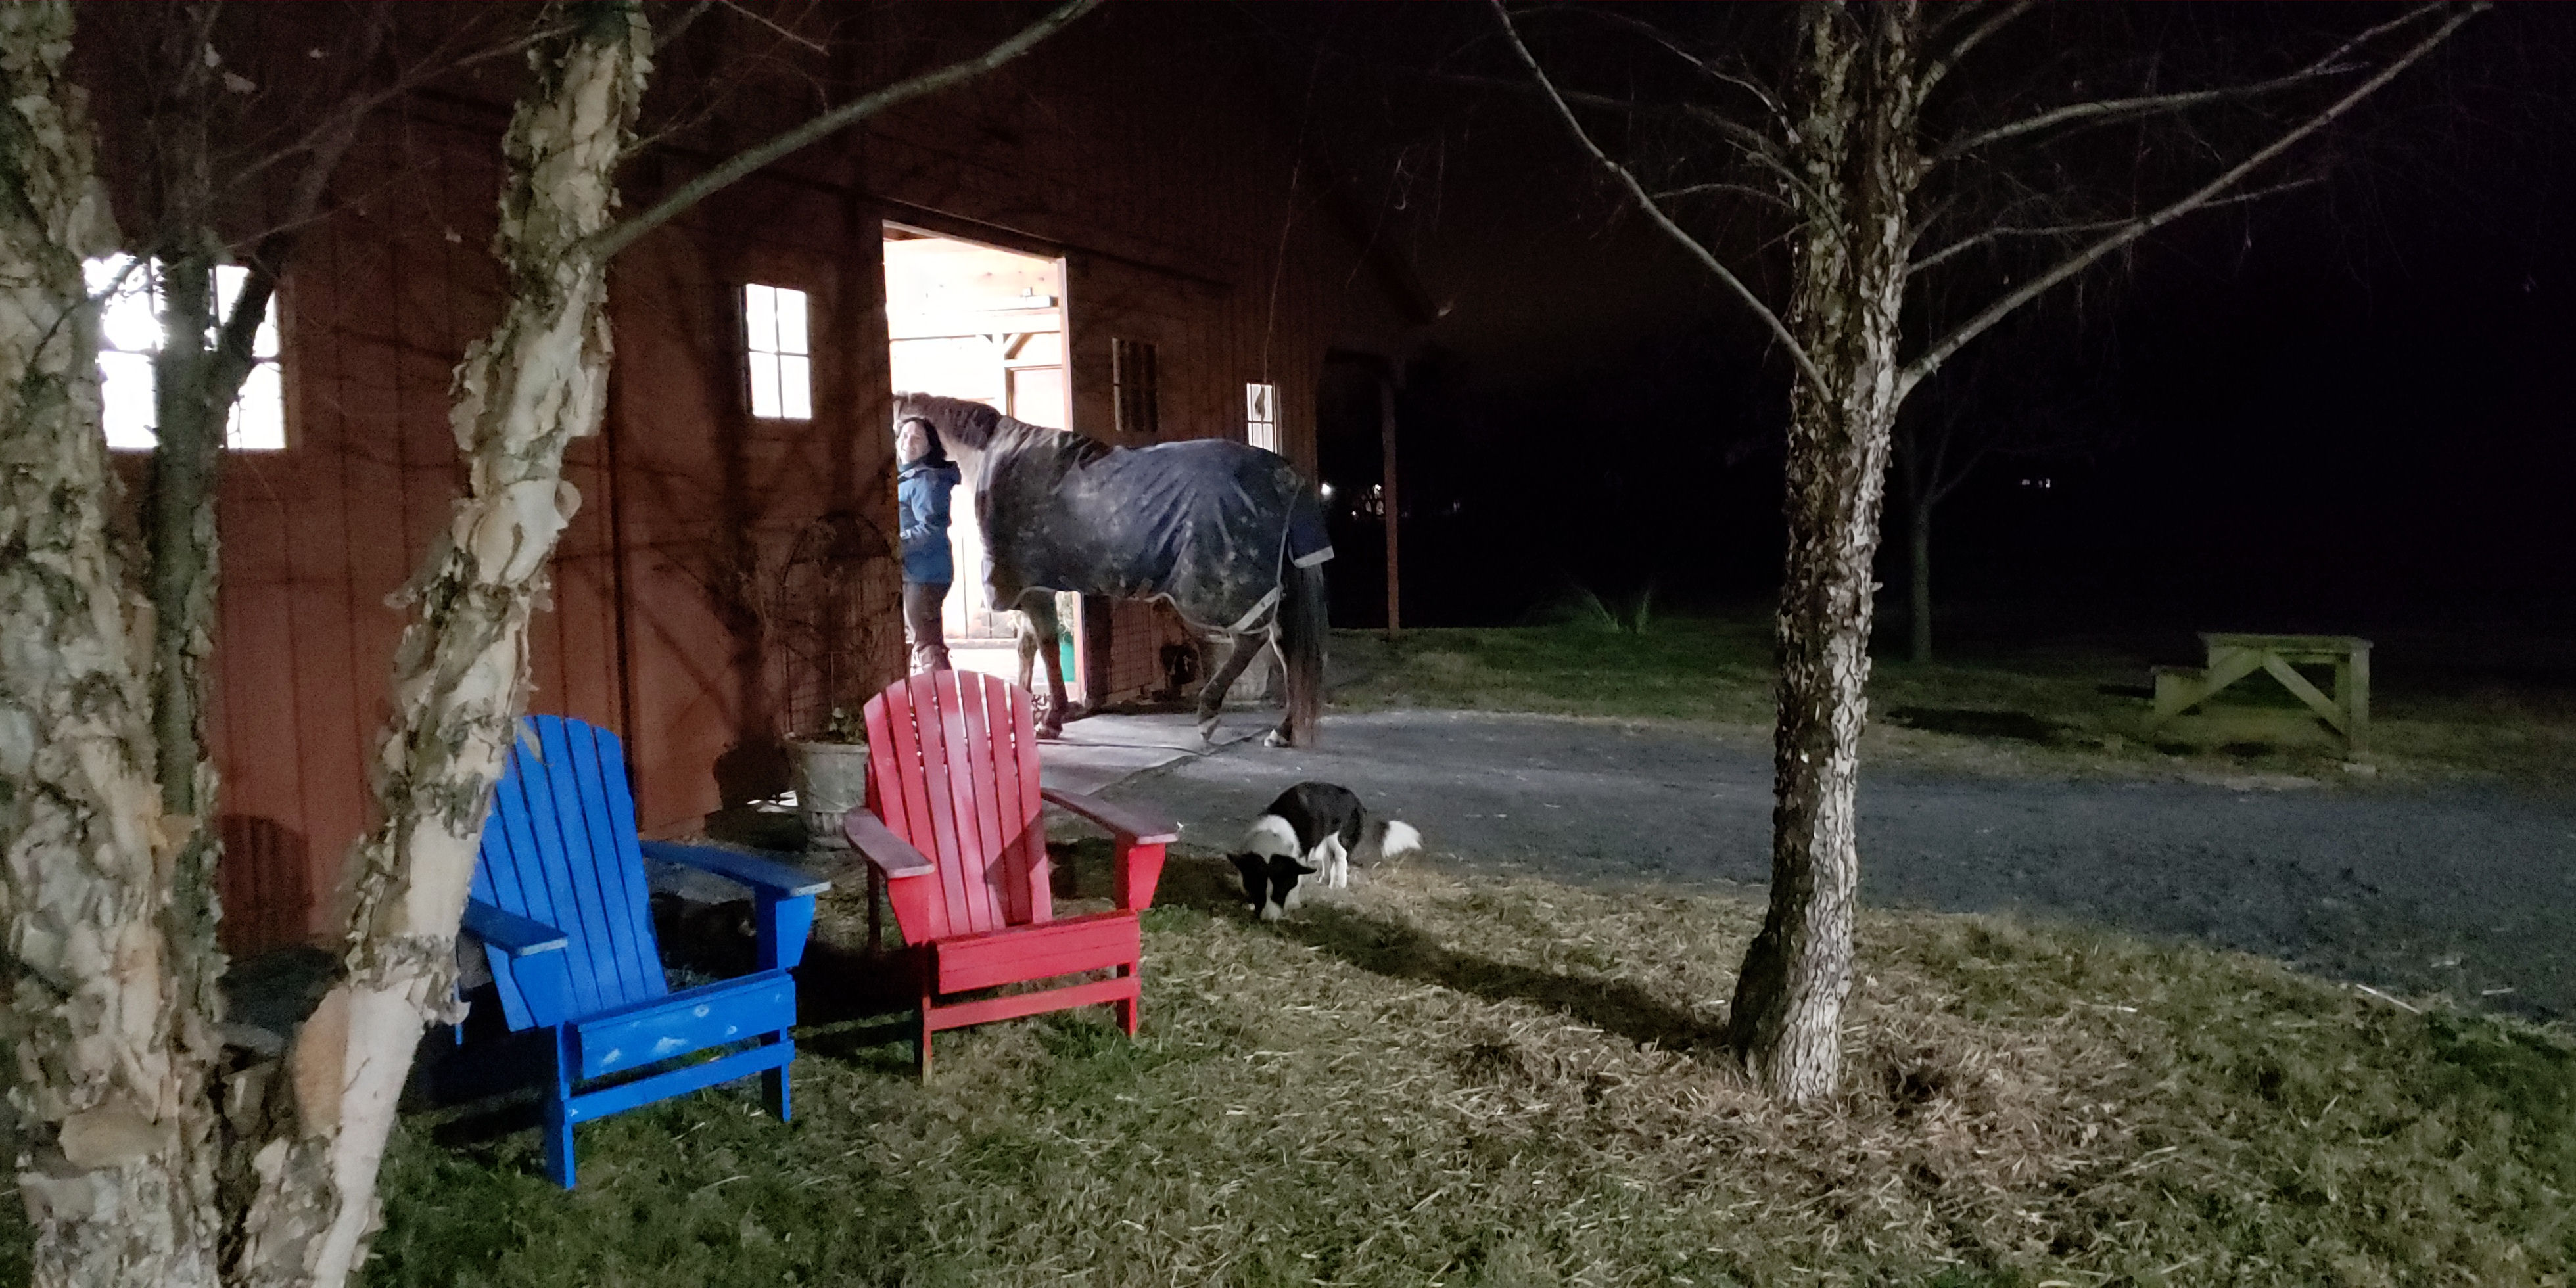 Leading a horse into the barn at night